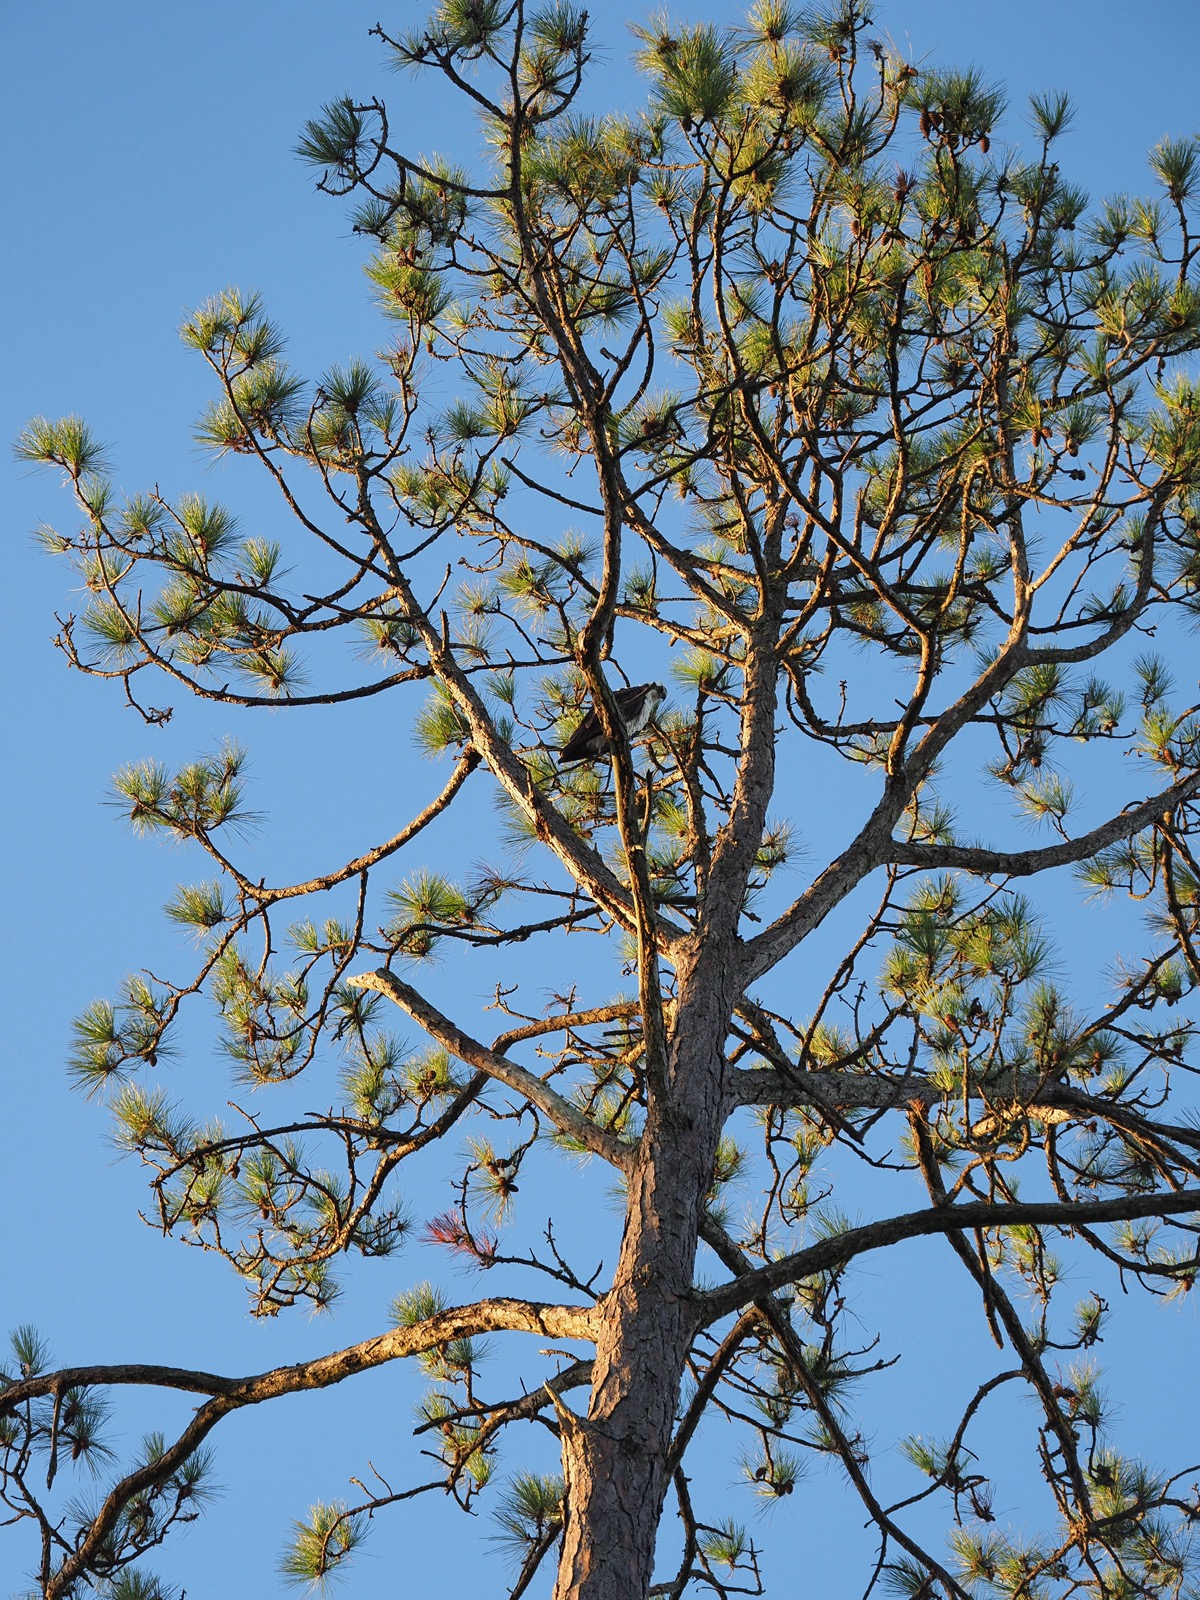 Medium telephoto image of an osprey perched in a pine tree, taken from below 